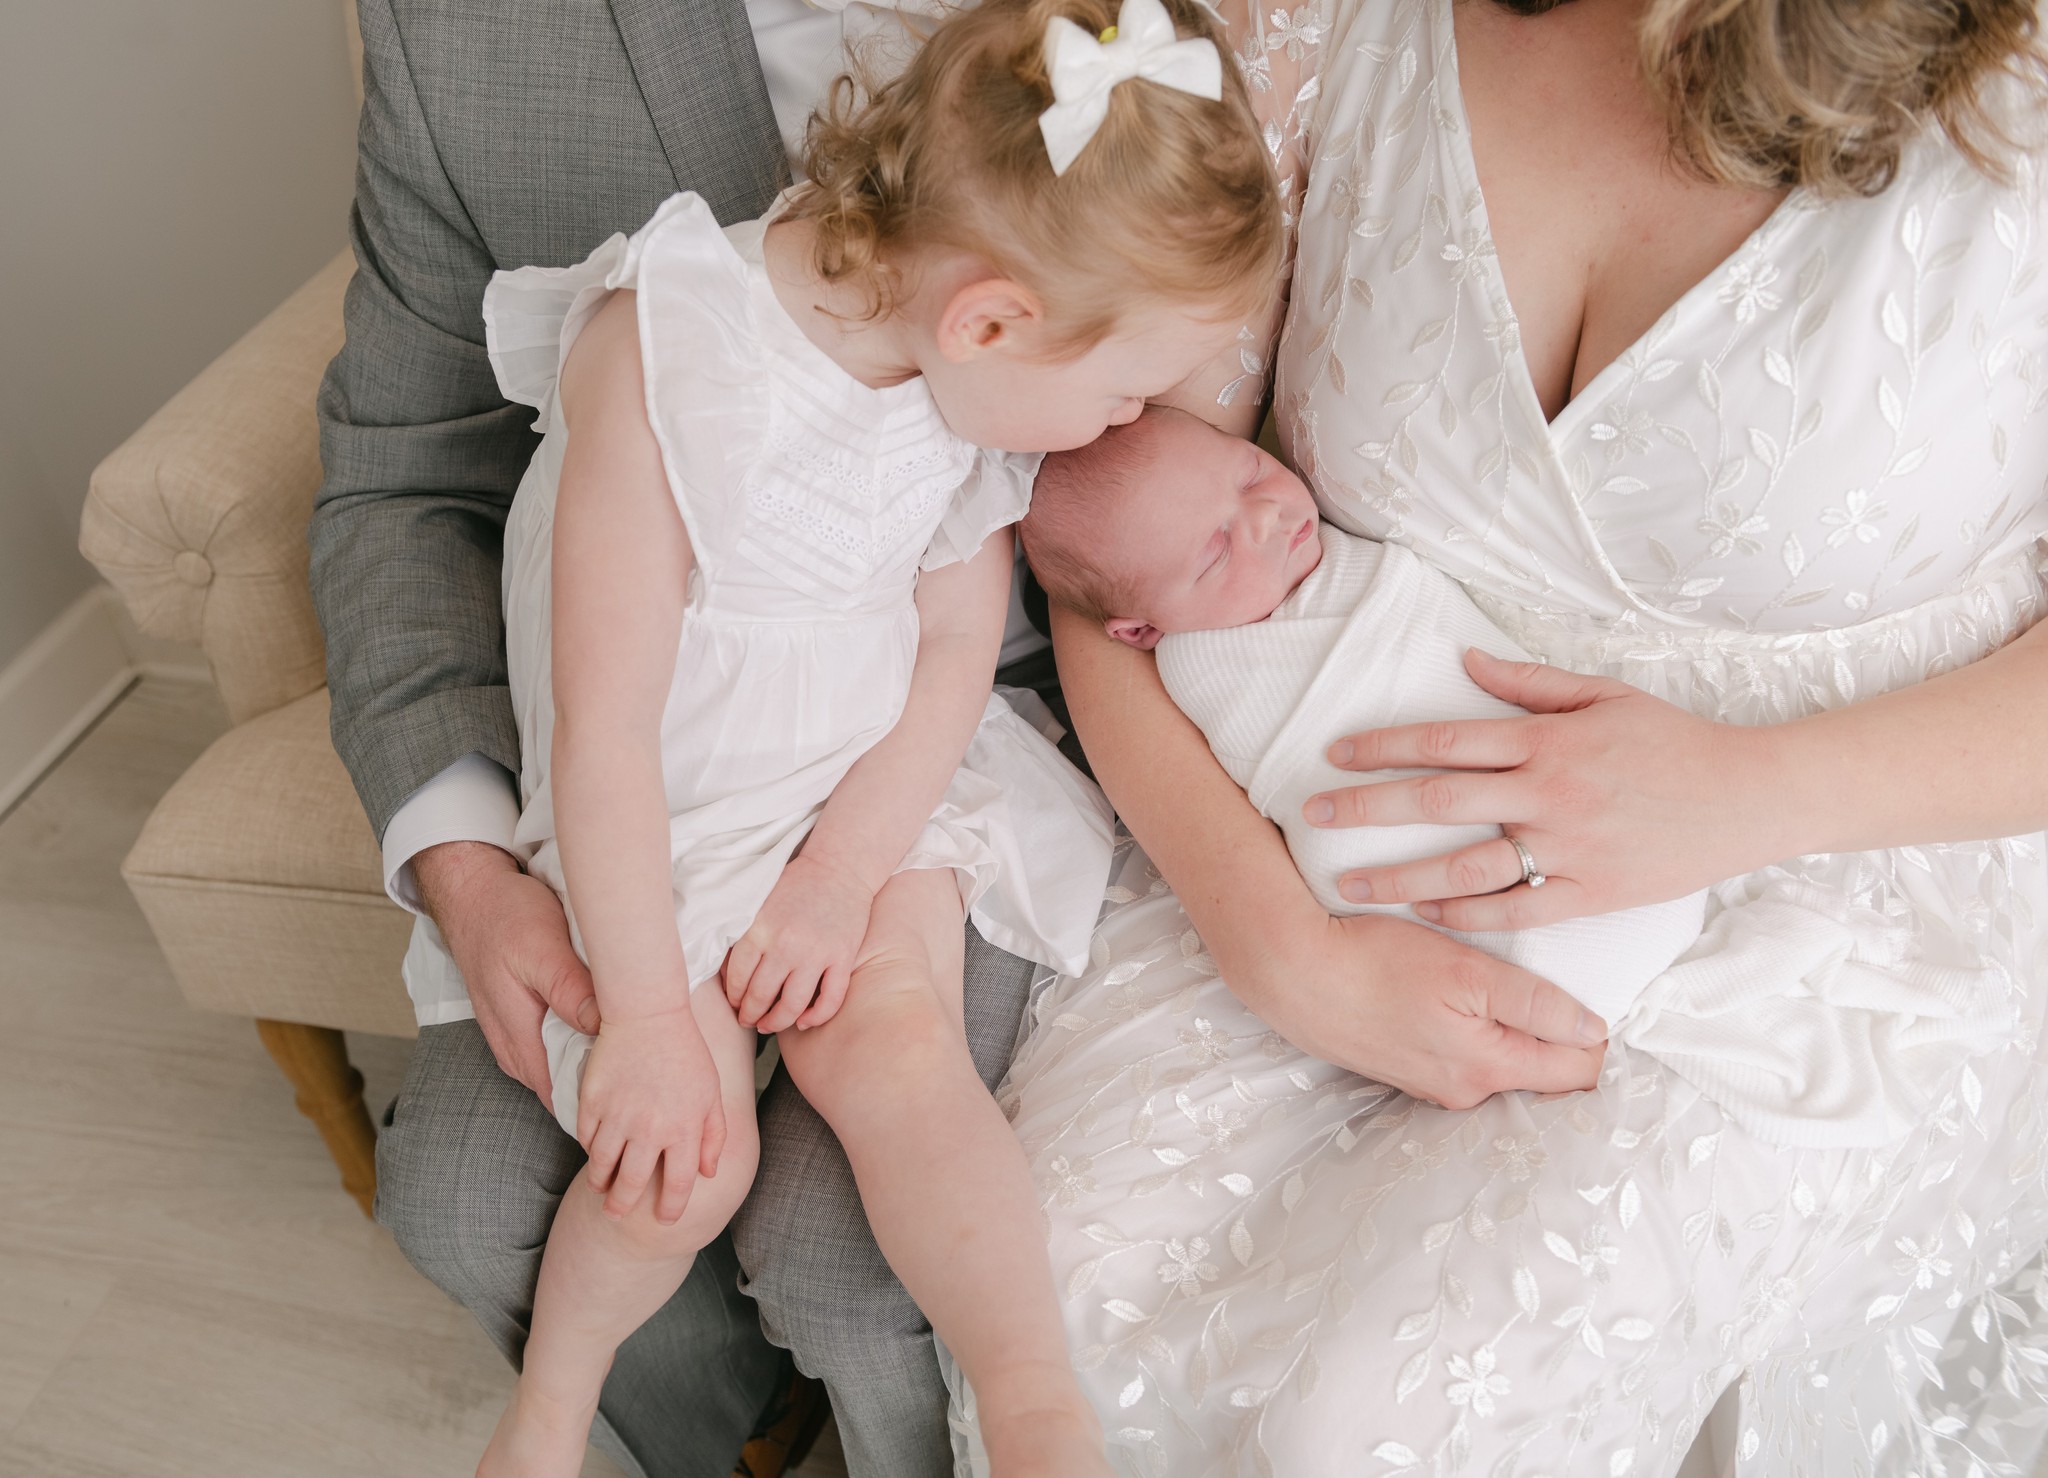 A mother in a white dress sits on a couch with her husband while she holds their newborn baby and their young daughter kisses the baby forehead chester county pediatricians